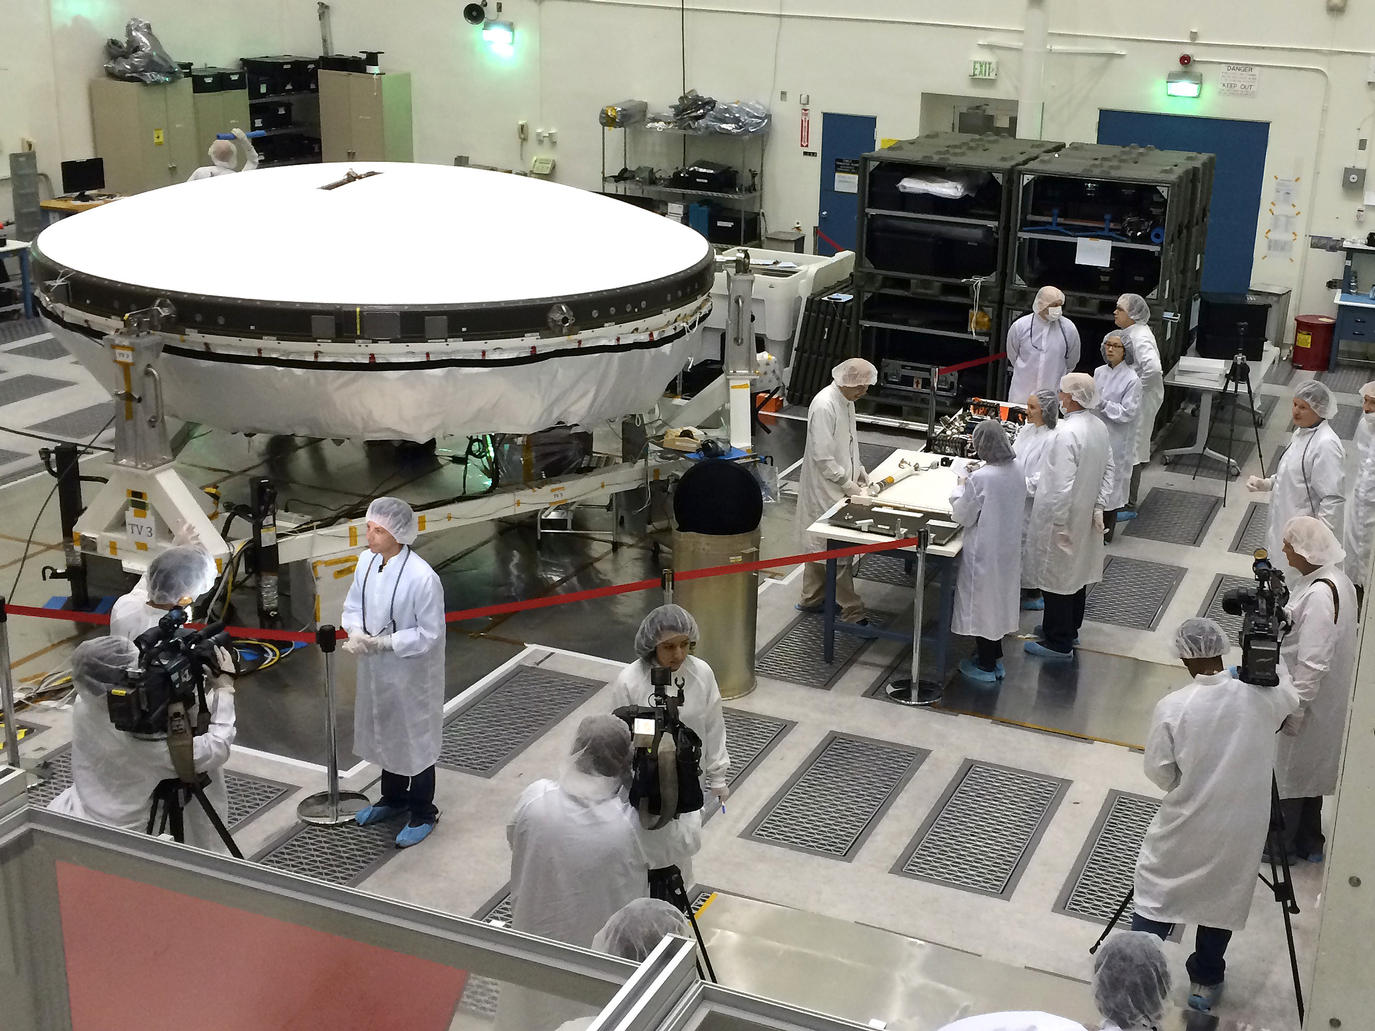 Members of the media got an up-close look at NASA's Low-Density Supersonic Decelerator (LDSD) flight-test vehicles currently in preparation in the clean room at NASA-JPL on March 31.